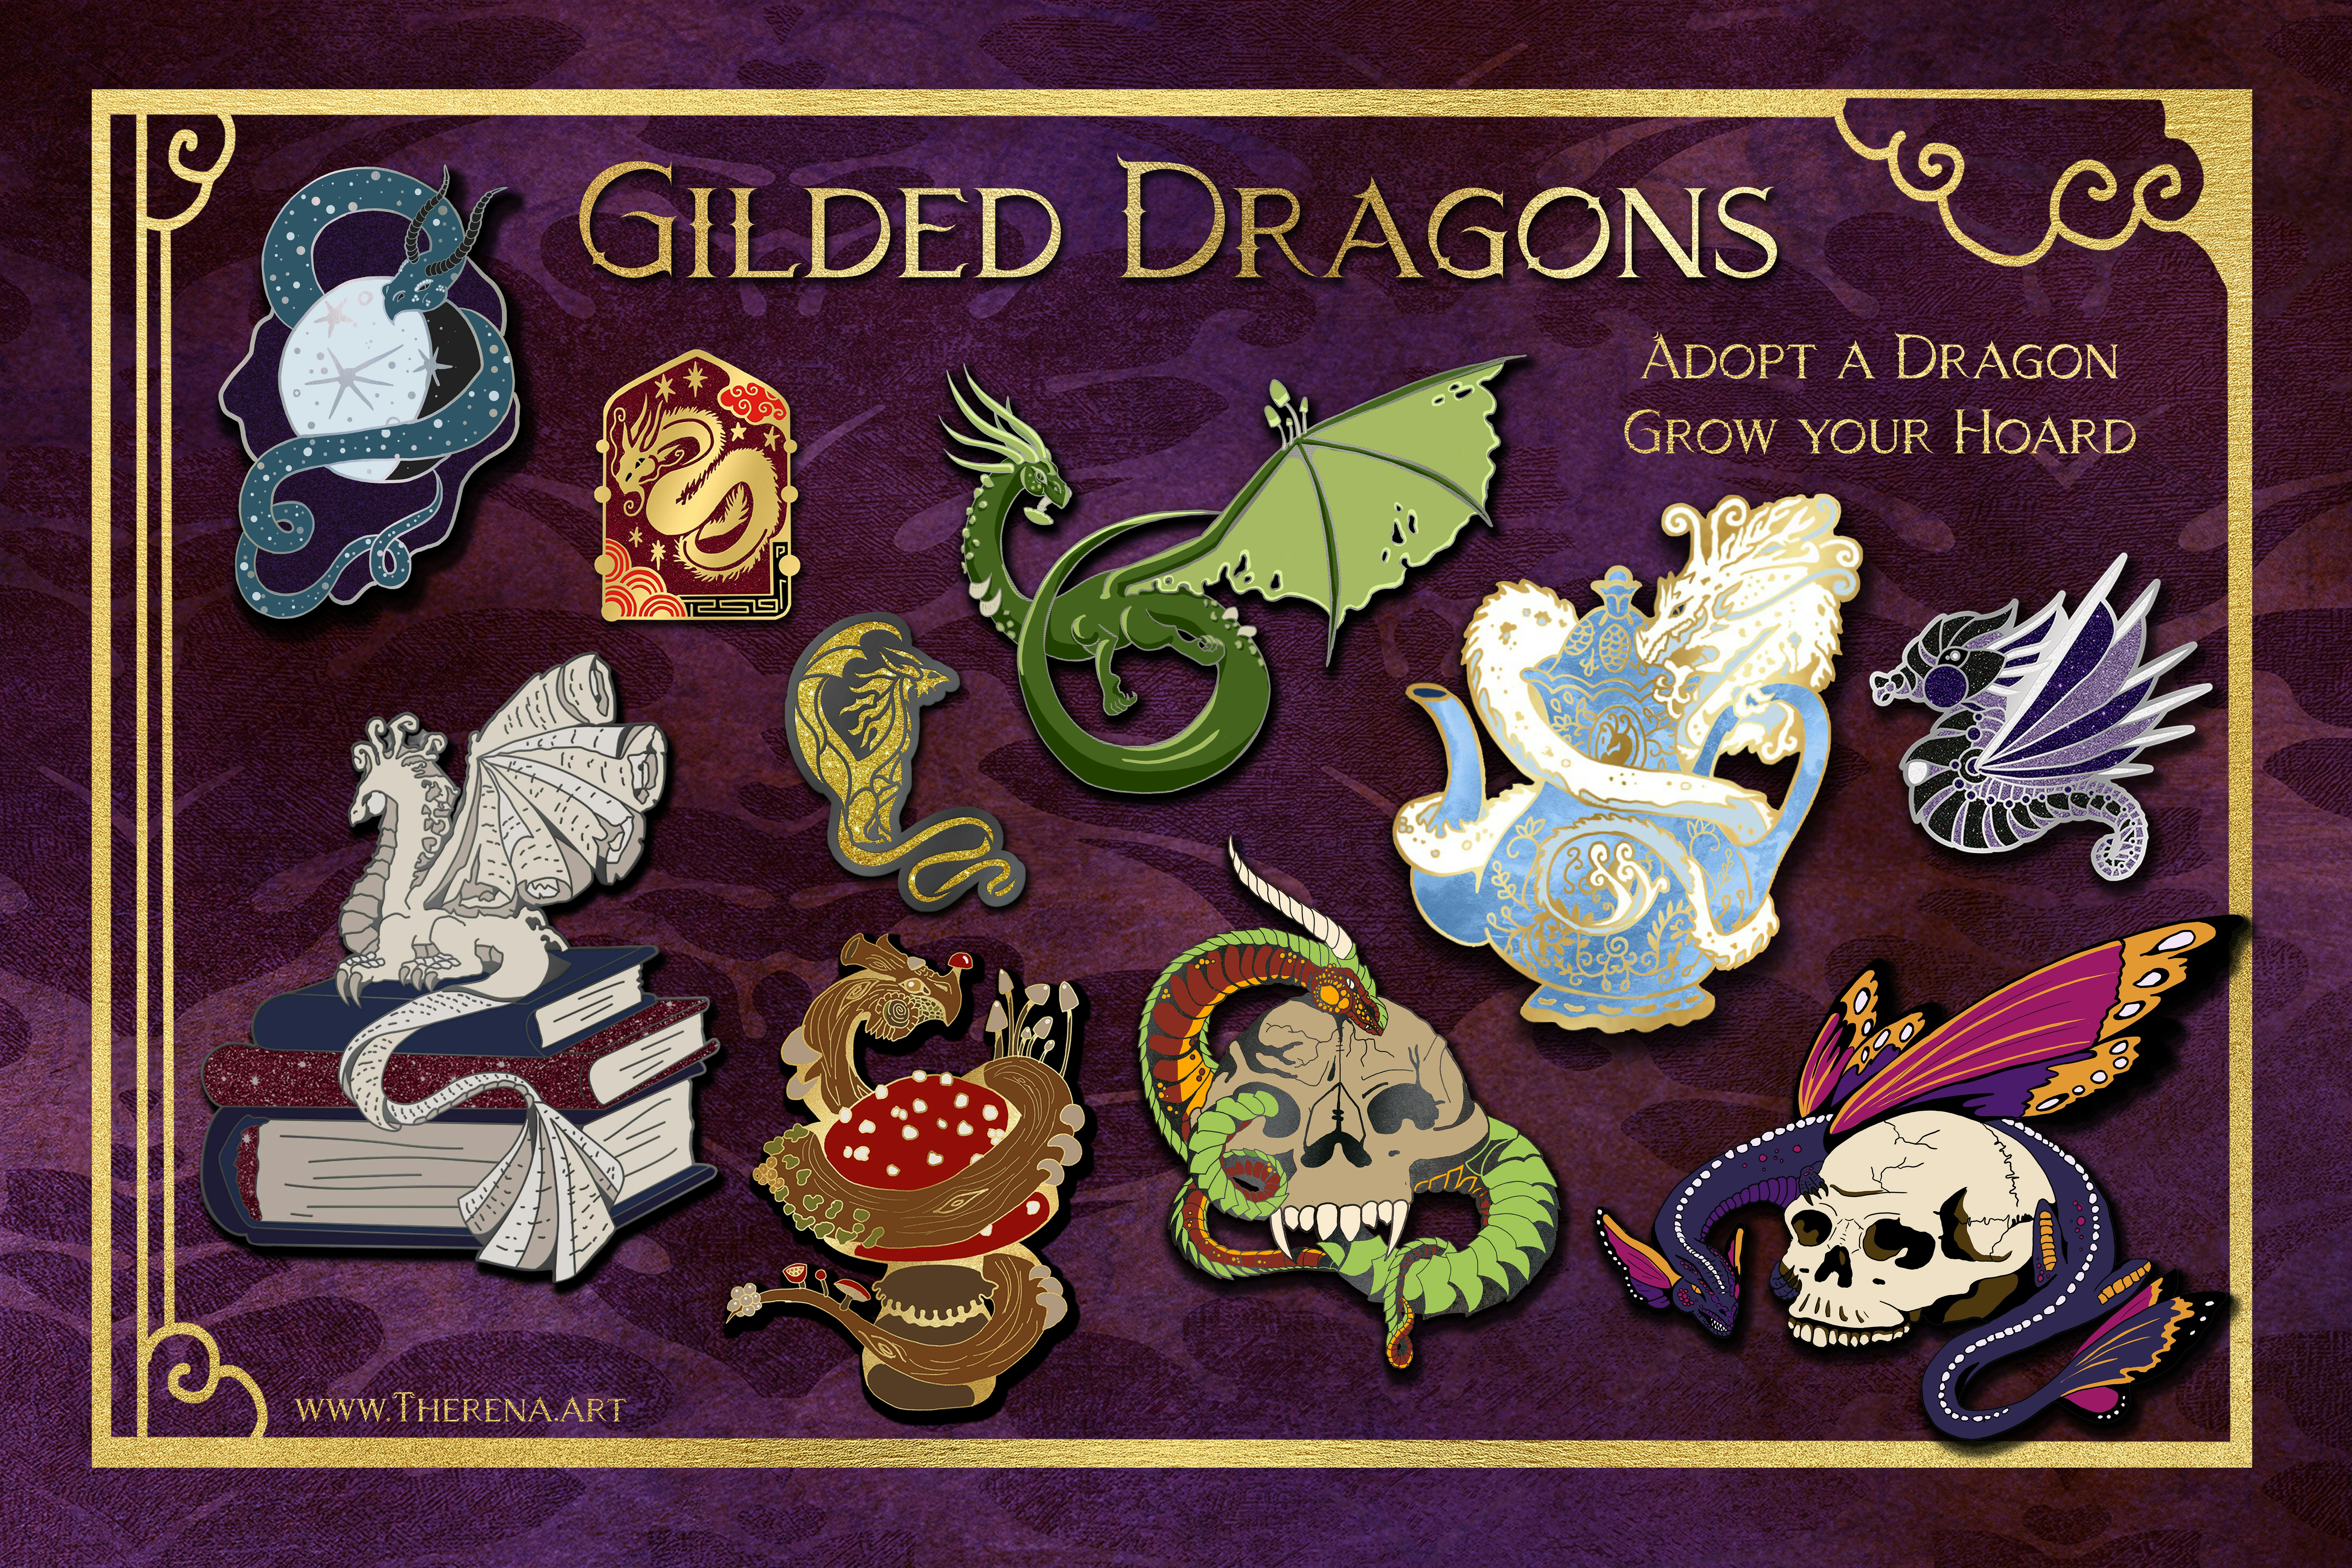 Reach $9500 - and the first 300 backers get a FREE exclusive dragon postcard!